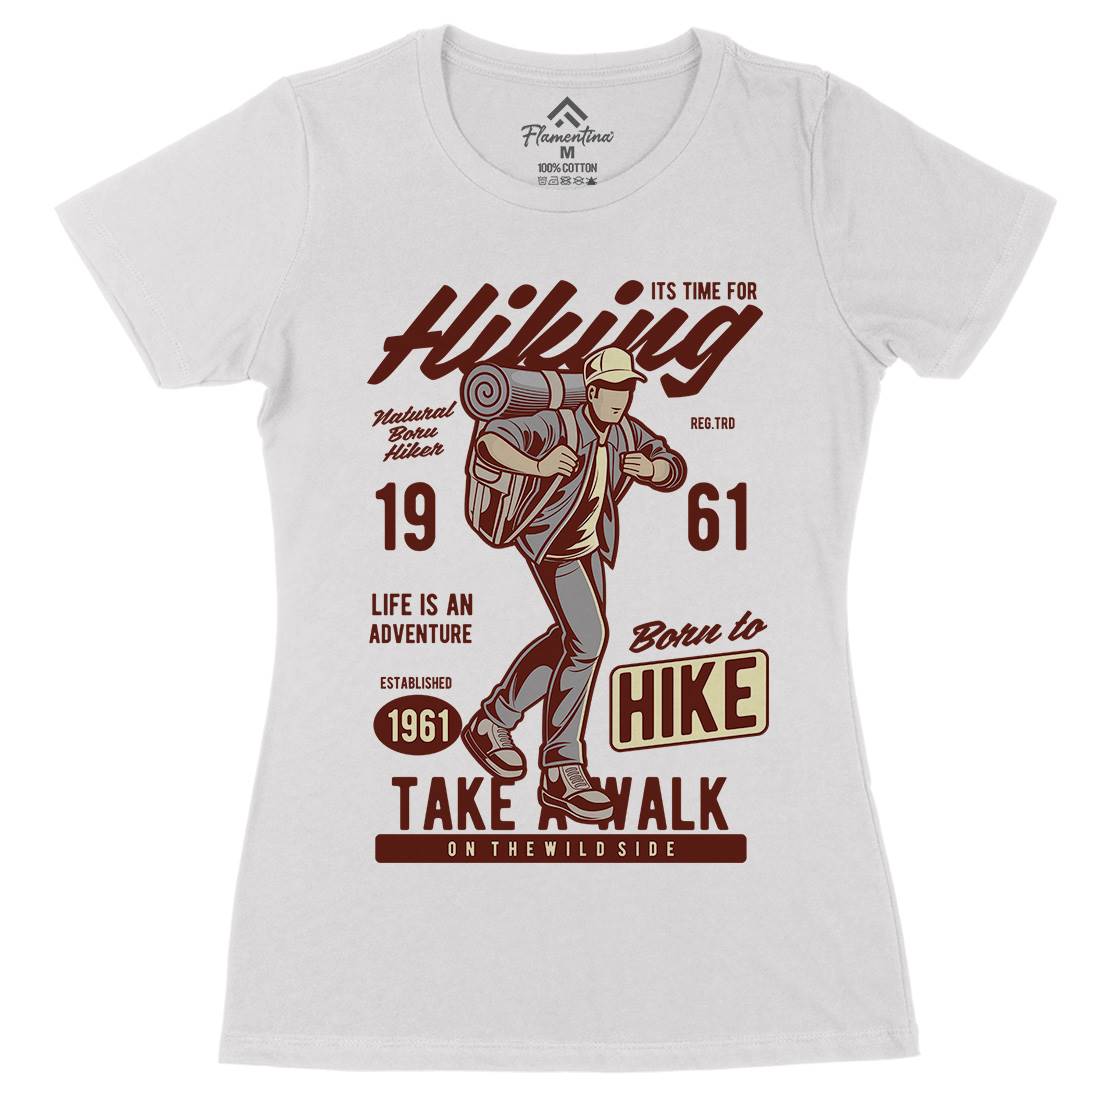 Its Time For Hiking Womens Organic Crew Neck T-Shirt Nature C382